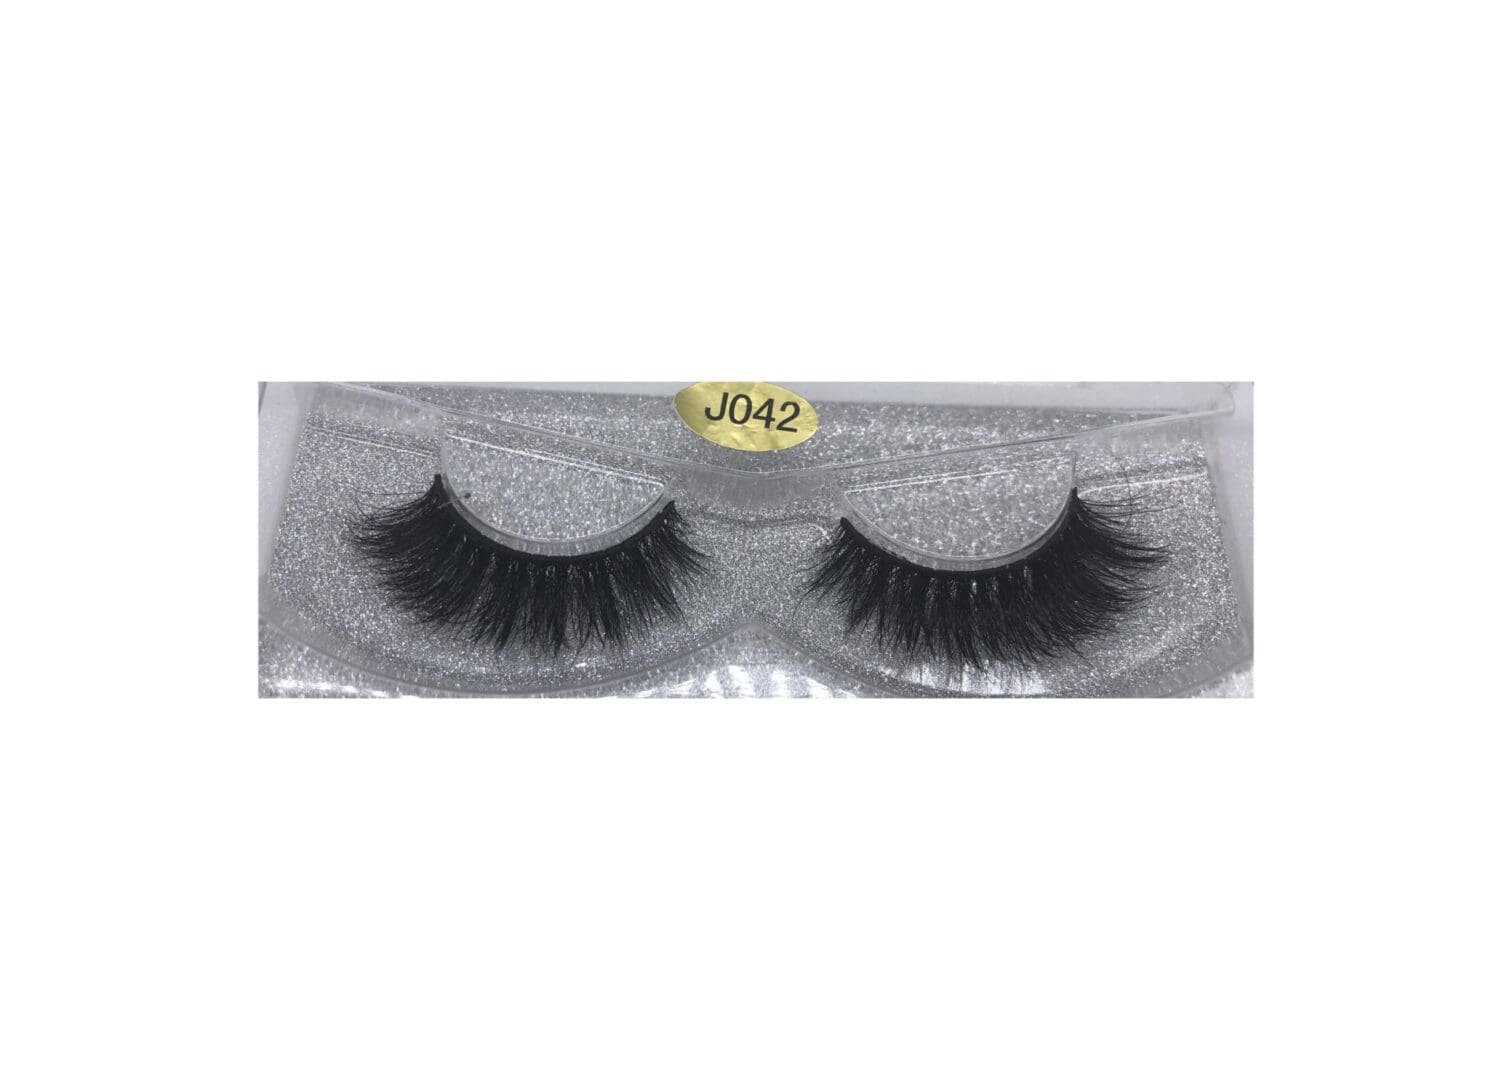 A pair of fake eyelashes in the package.